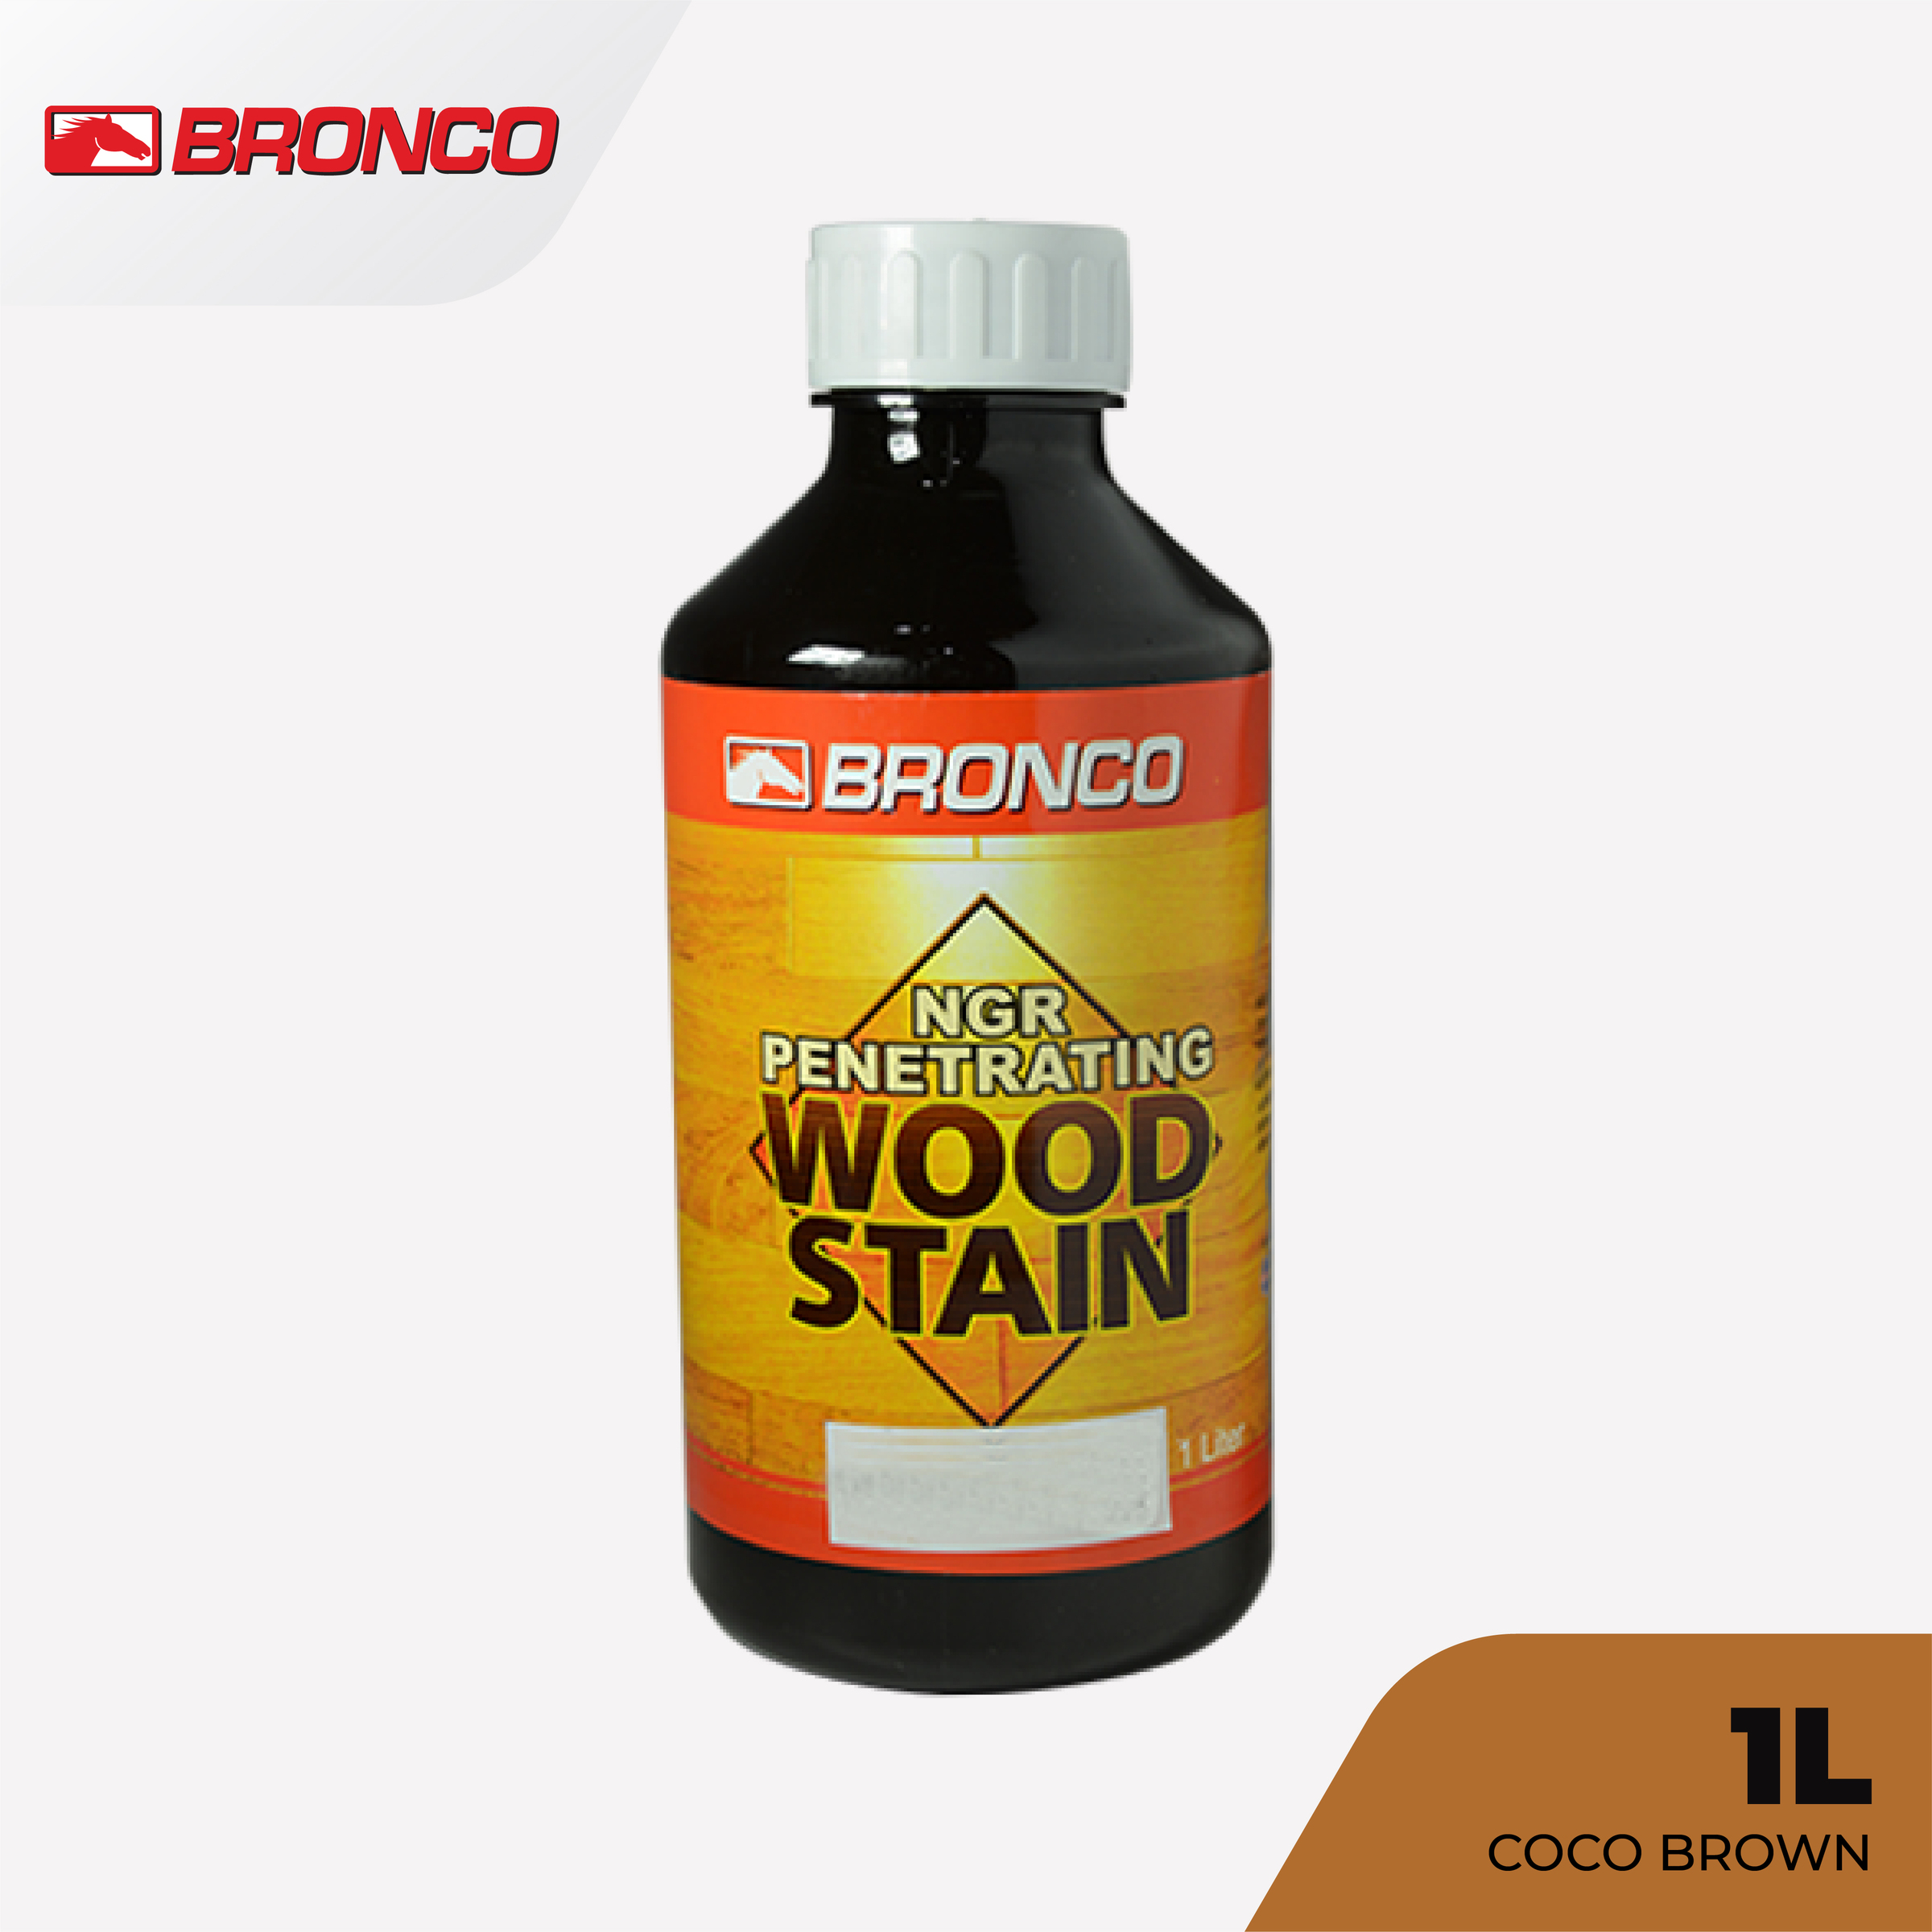 Bronco NGR Penetrating Wood Stain Coco Brown - 1L